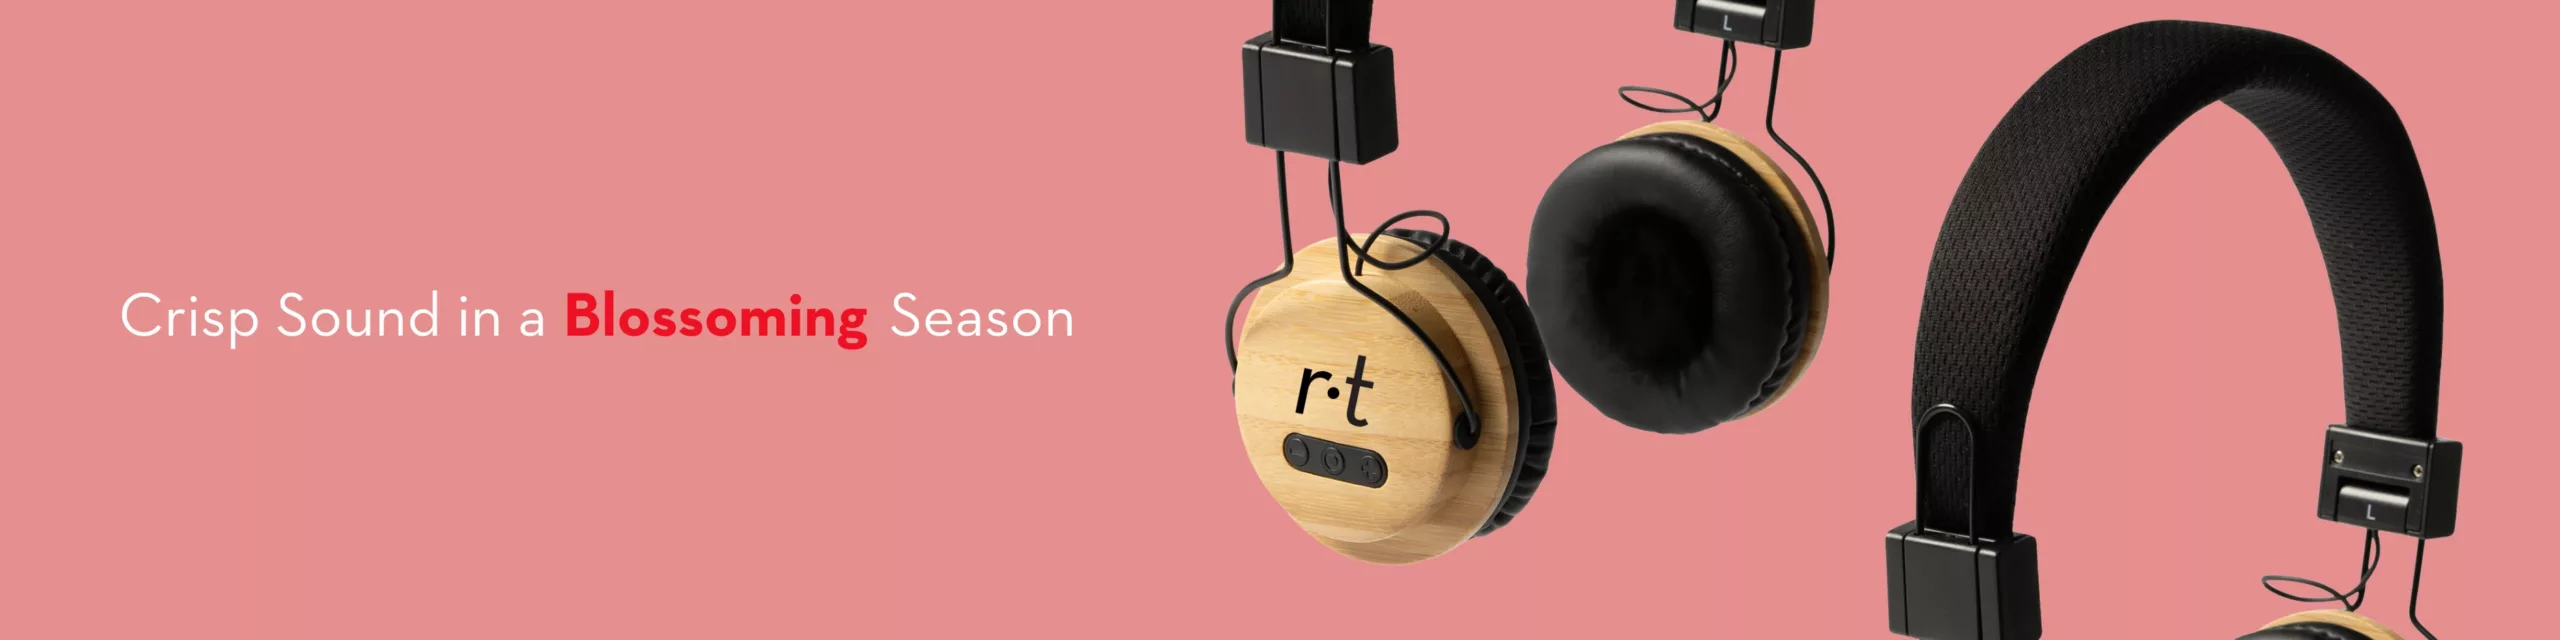 Spring Collection - Headphones gift ideas